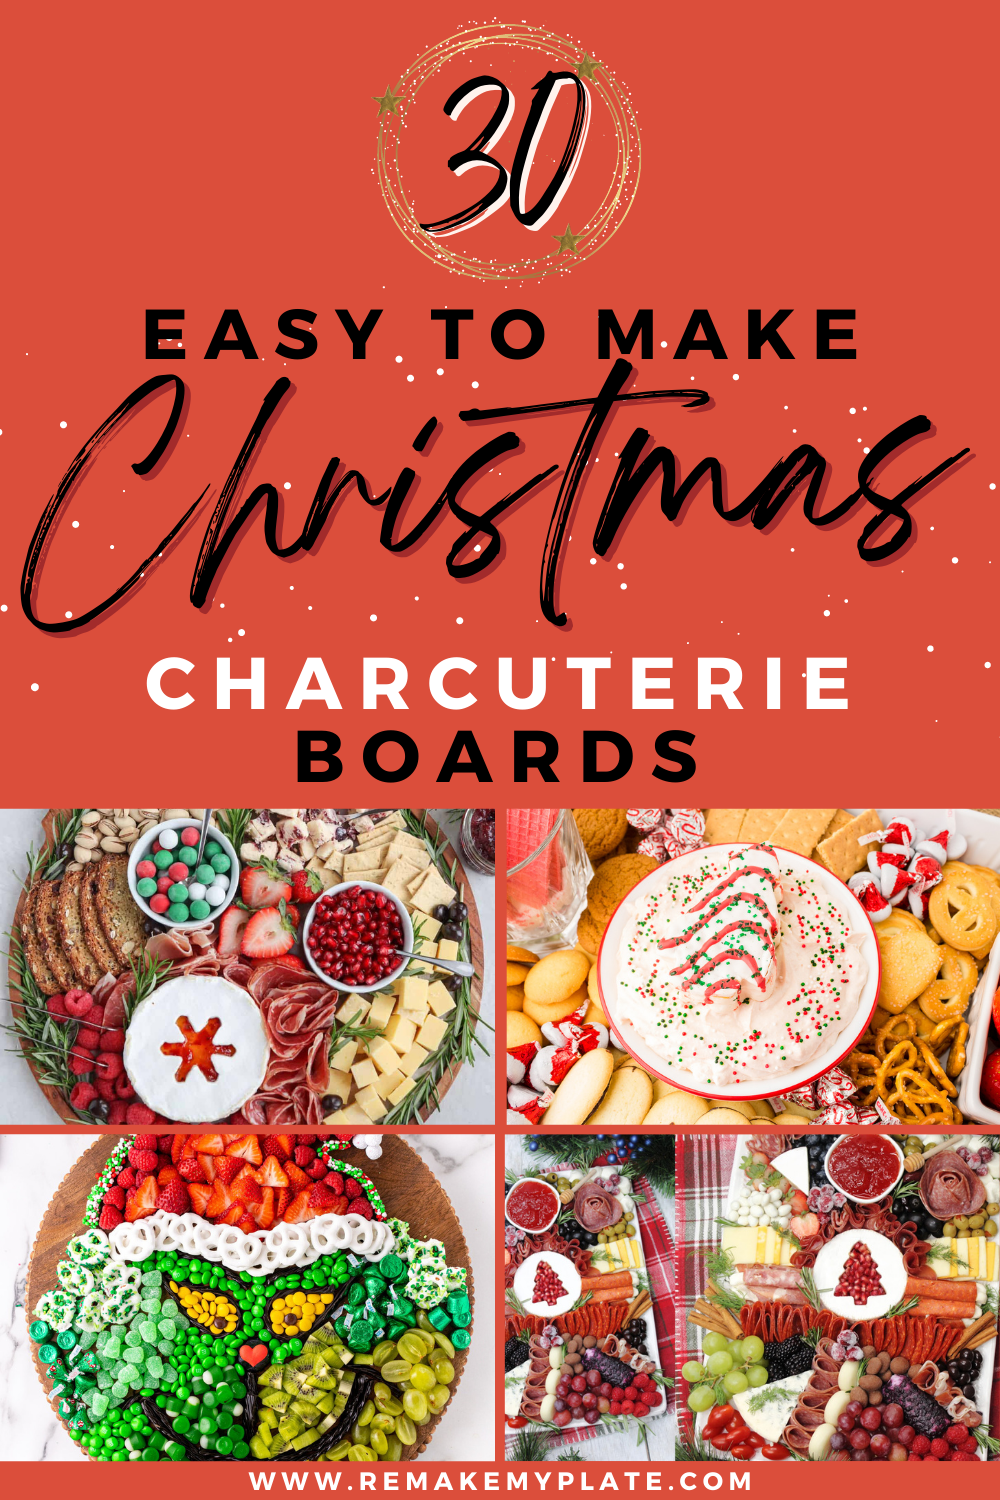 30 easy to make Christmas charcuterie boards